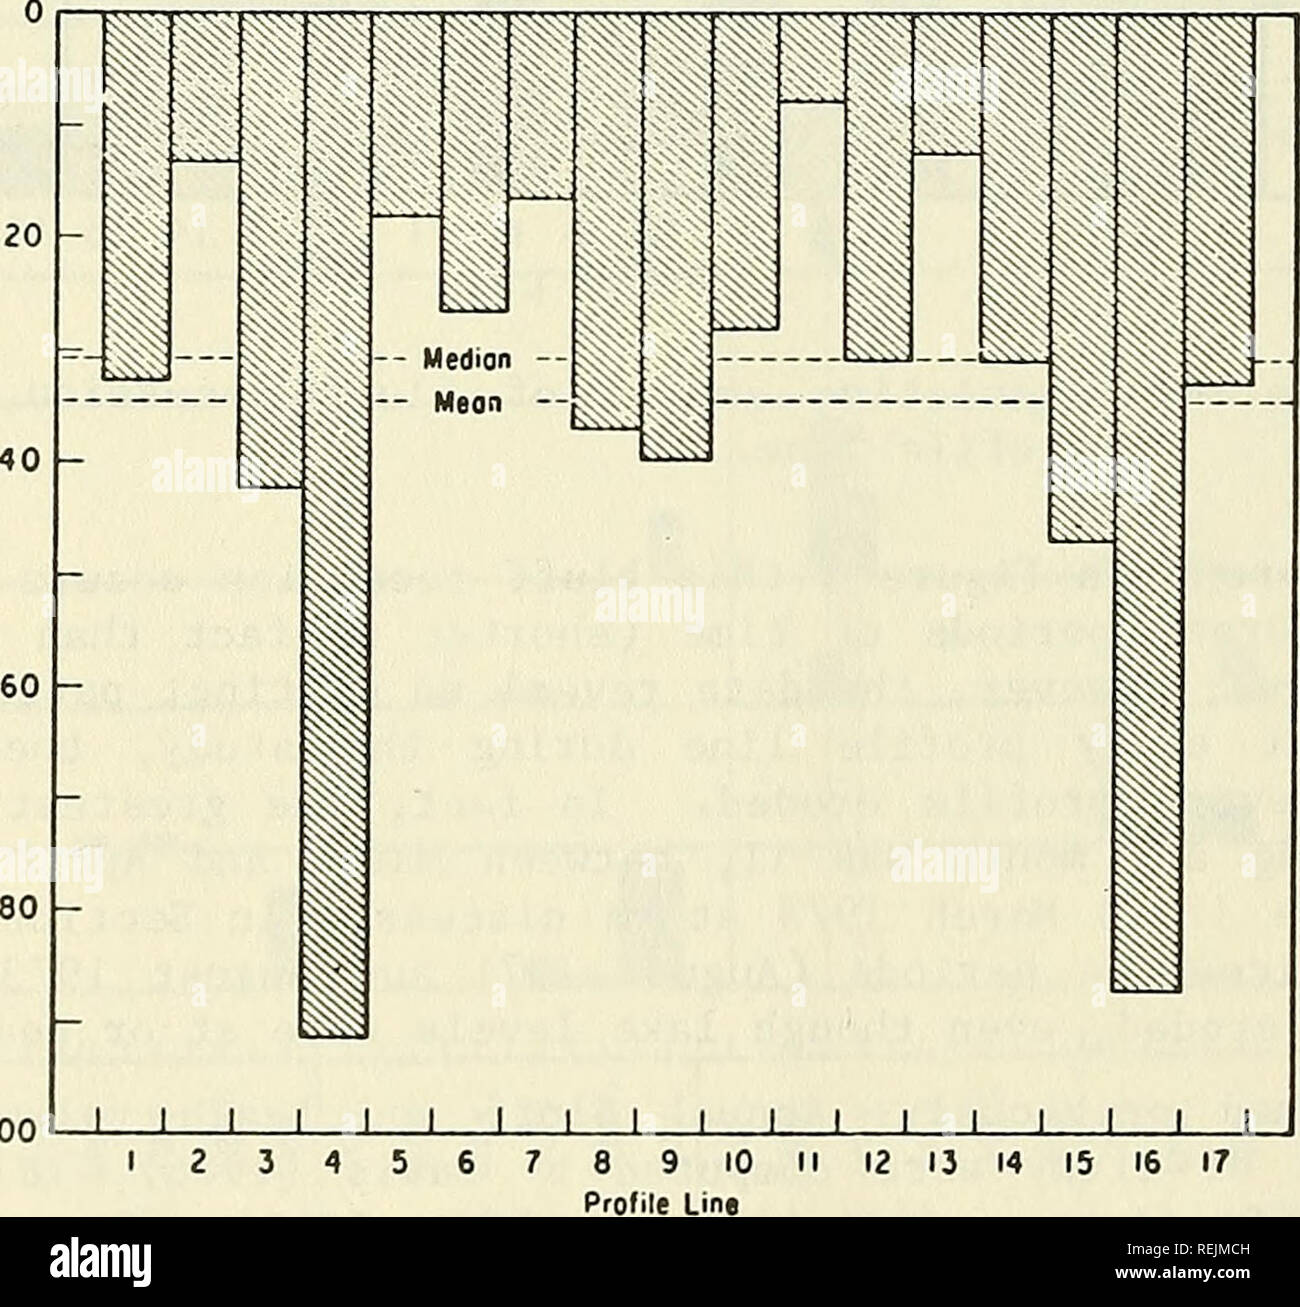 . Coastal changes, eastern Lake Michigan, 1970-1974. Coast changes. Table 4. Annual bluff and beach volume changes (in cubic meters per meter).^ Profile Aug. 1970 July 1971 July 1972 Oct. 1973 Sept. line to to to to- to Total July 1971 July 1972 July 1973 Sept. 1974 Dec. 1974 1 -2.5 -12.5 -20.1 1.3 0.8 -33.0 2 2.5 -2.5 -5.0 -1.4 -6.7 -13.1 3 -10.0 -10.0 -15.1 -4.8 -2.3 -42.2 U -15.1 -37.6 -A5.2 5.6 0.6 -91.7 5 -15.1 2.5 -2.5 -4.2 1.4 -17.9 6 7.5 -5.0 -10.0 -21.0 2.1 -26.4 7 -15.1 0 -2.5 -7.5 8.7 -16.4 8 0 -2.5 -2.5 -31.8 -0.3 -37.1 9 -7.5 -5.0 -V.b -9.0 0 -39.1 10 -5.0 -7.5 0 -19.8 4.2 -28.1 1 Stock Photo